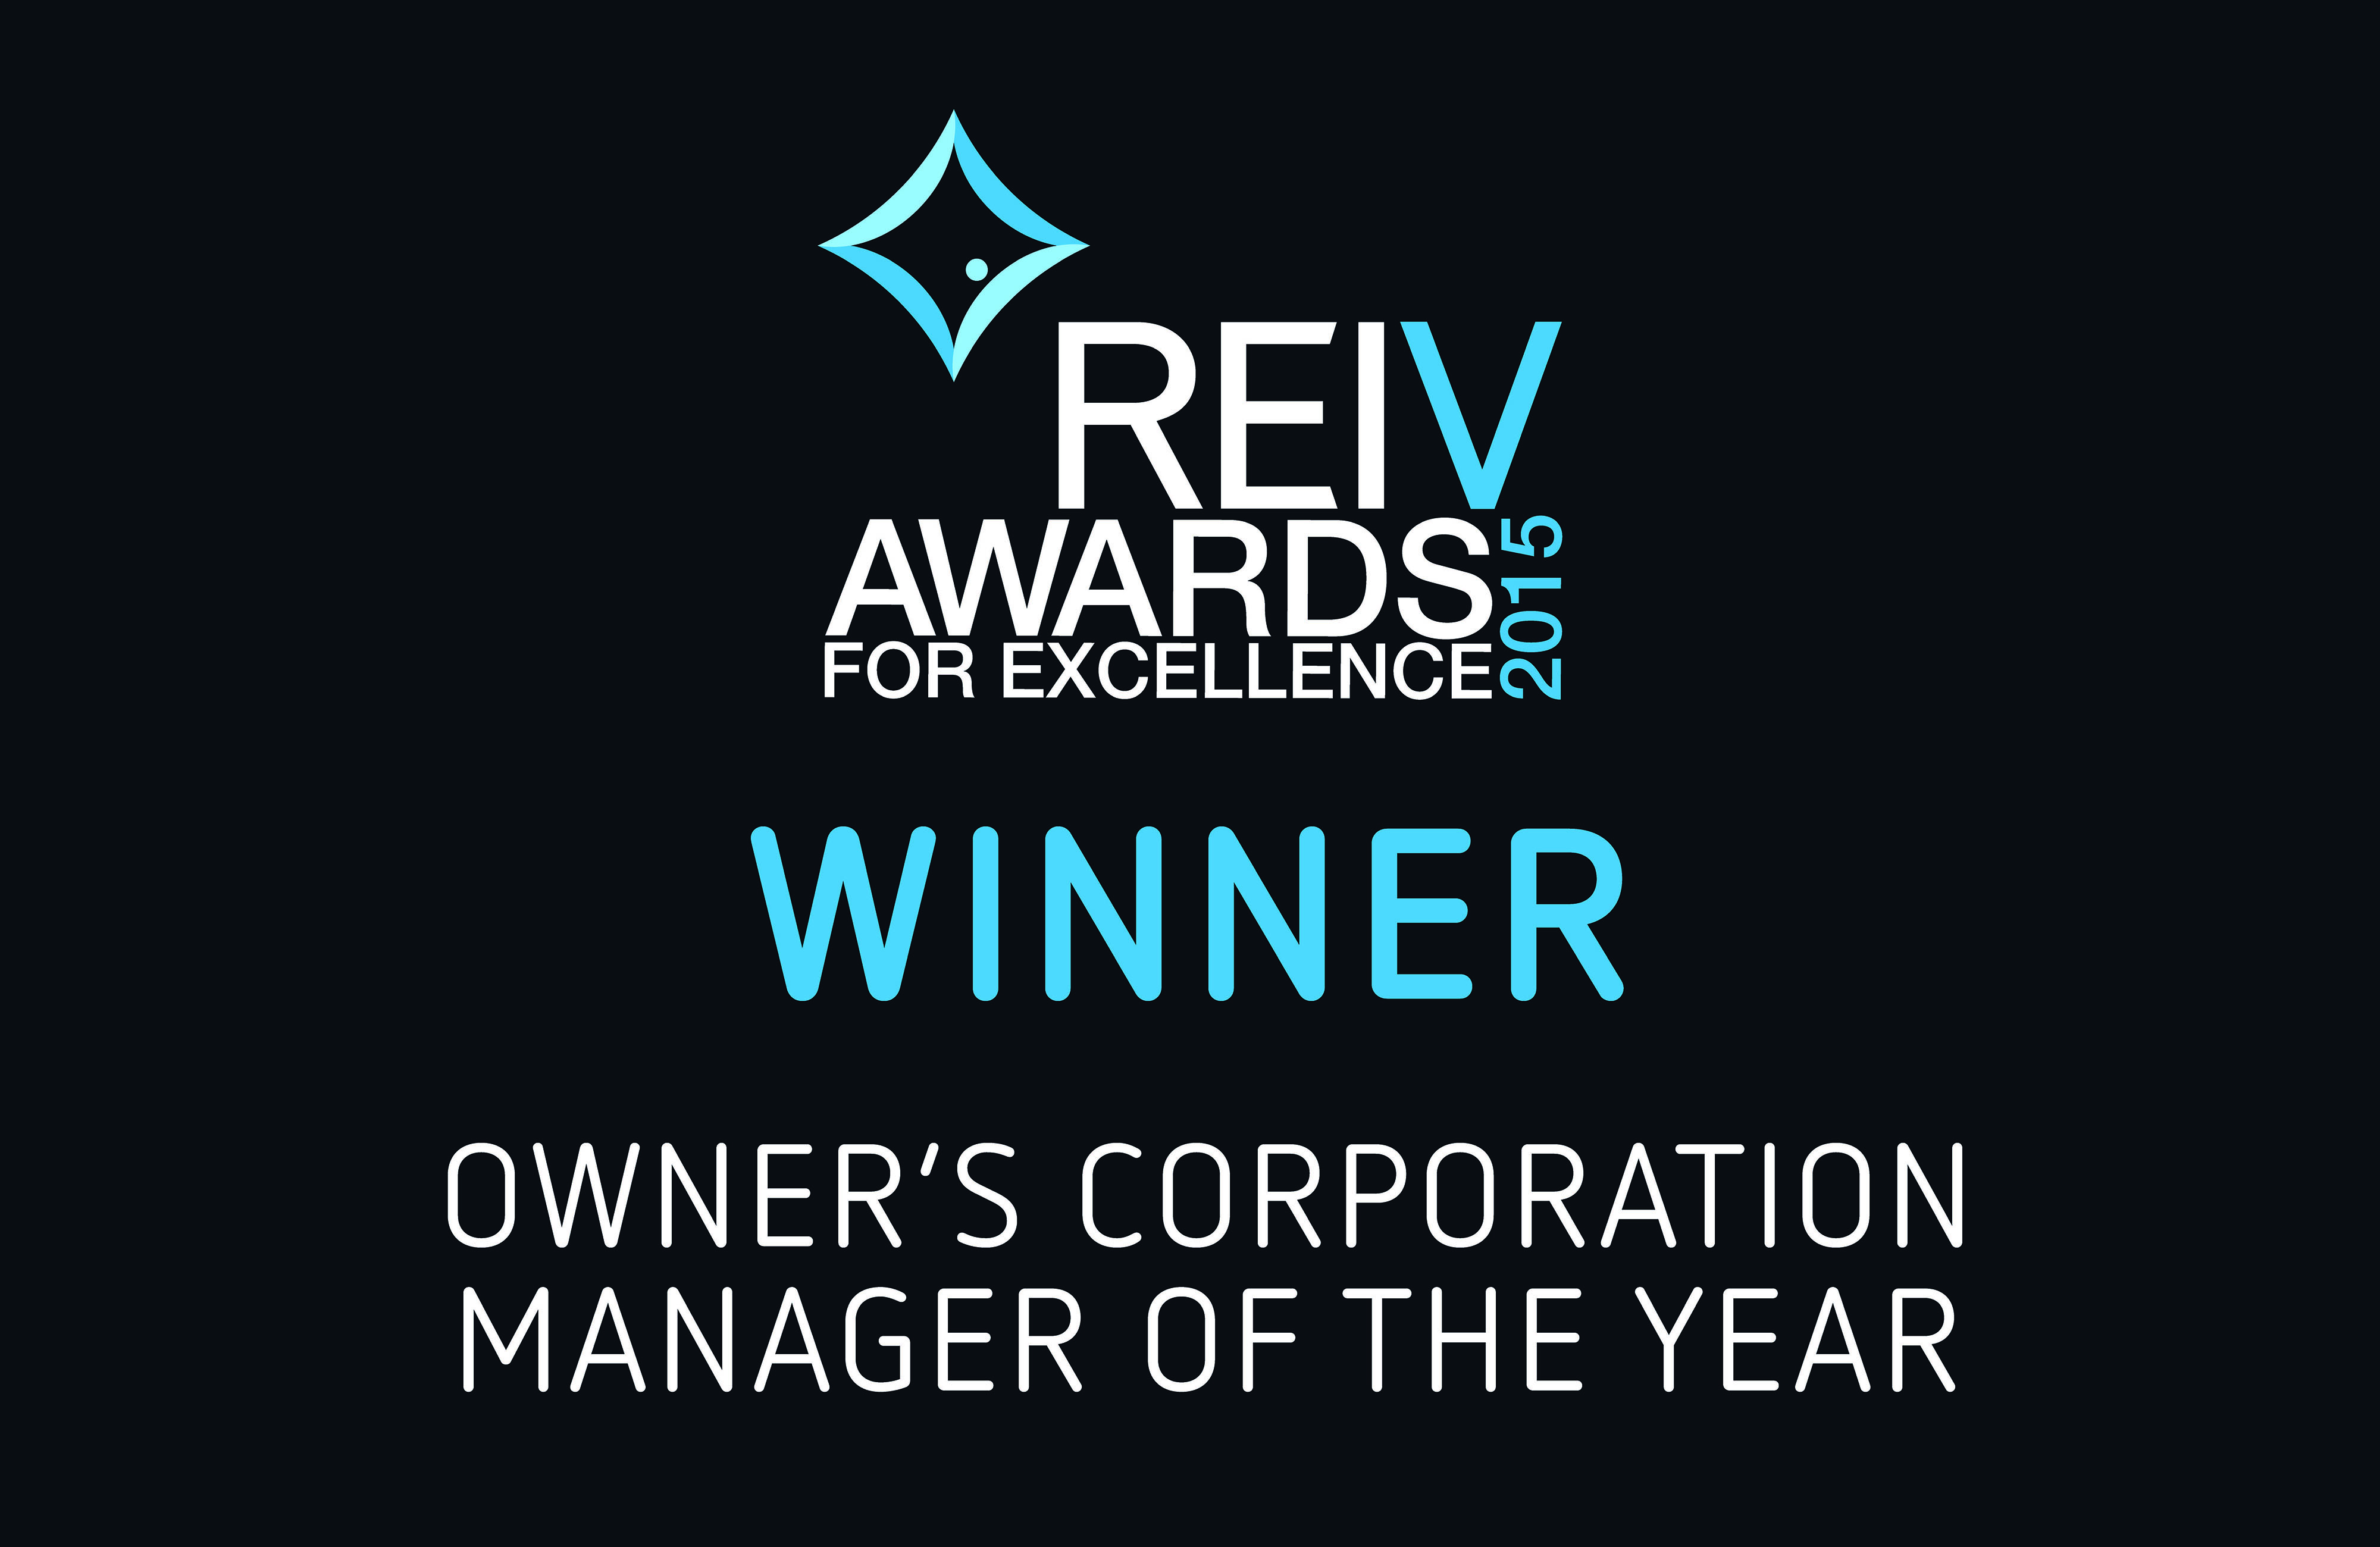 2015 - REIV Owners Corporation Manager of the Year - Ronald Perera